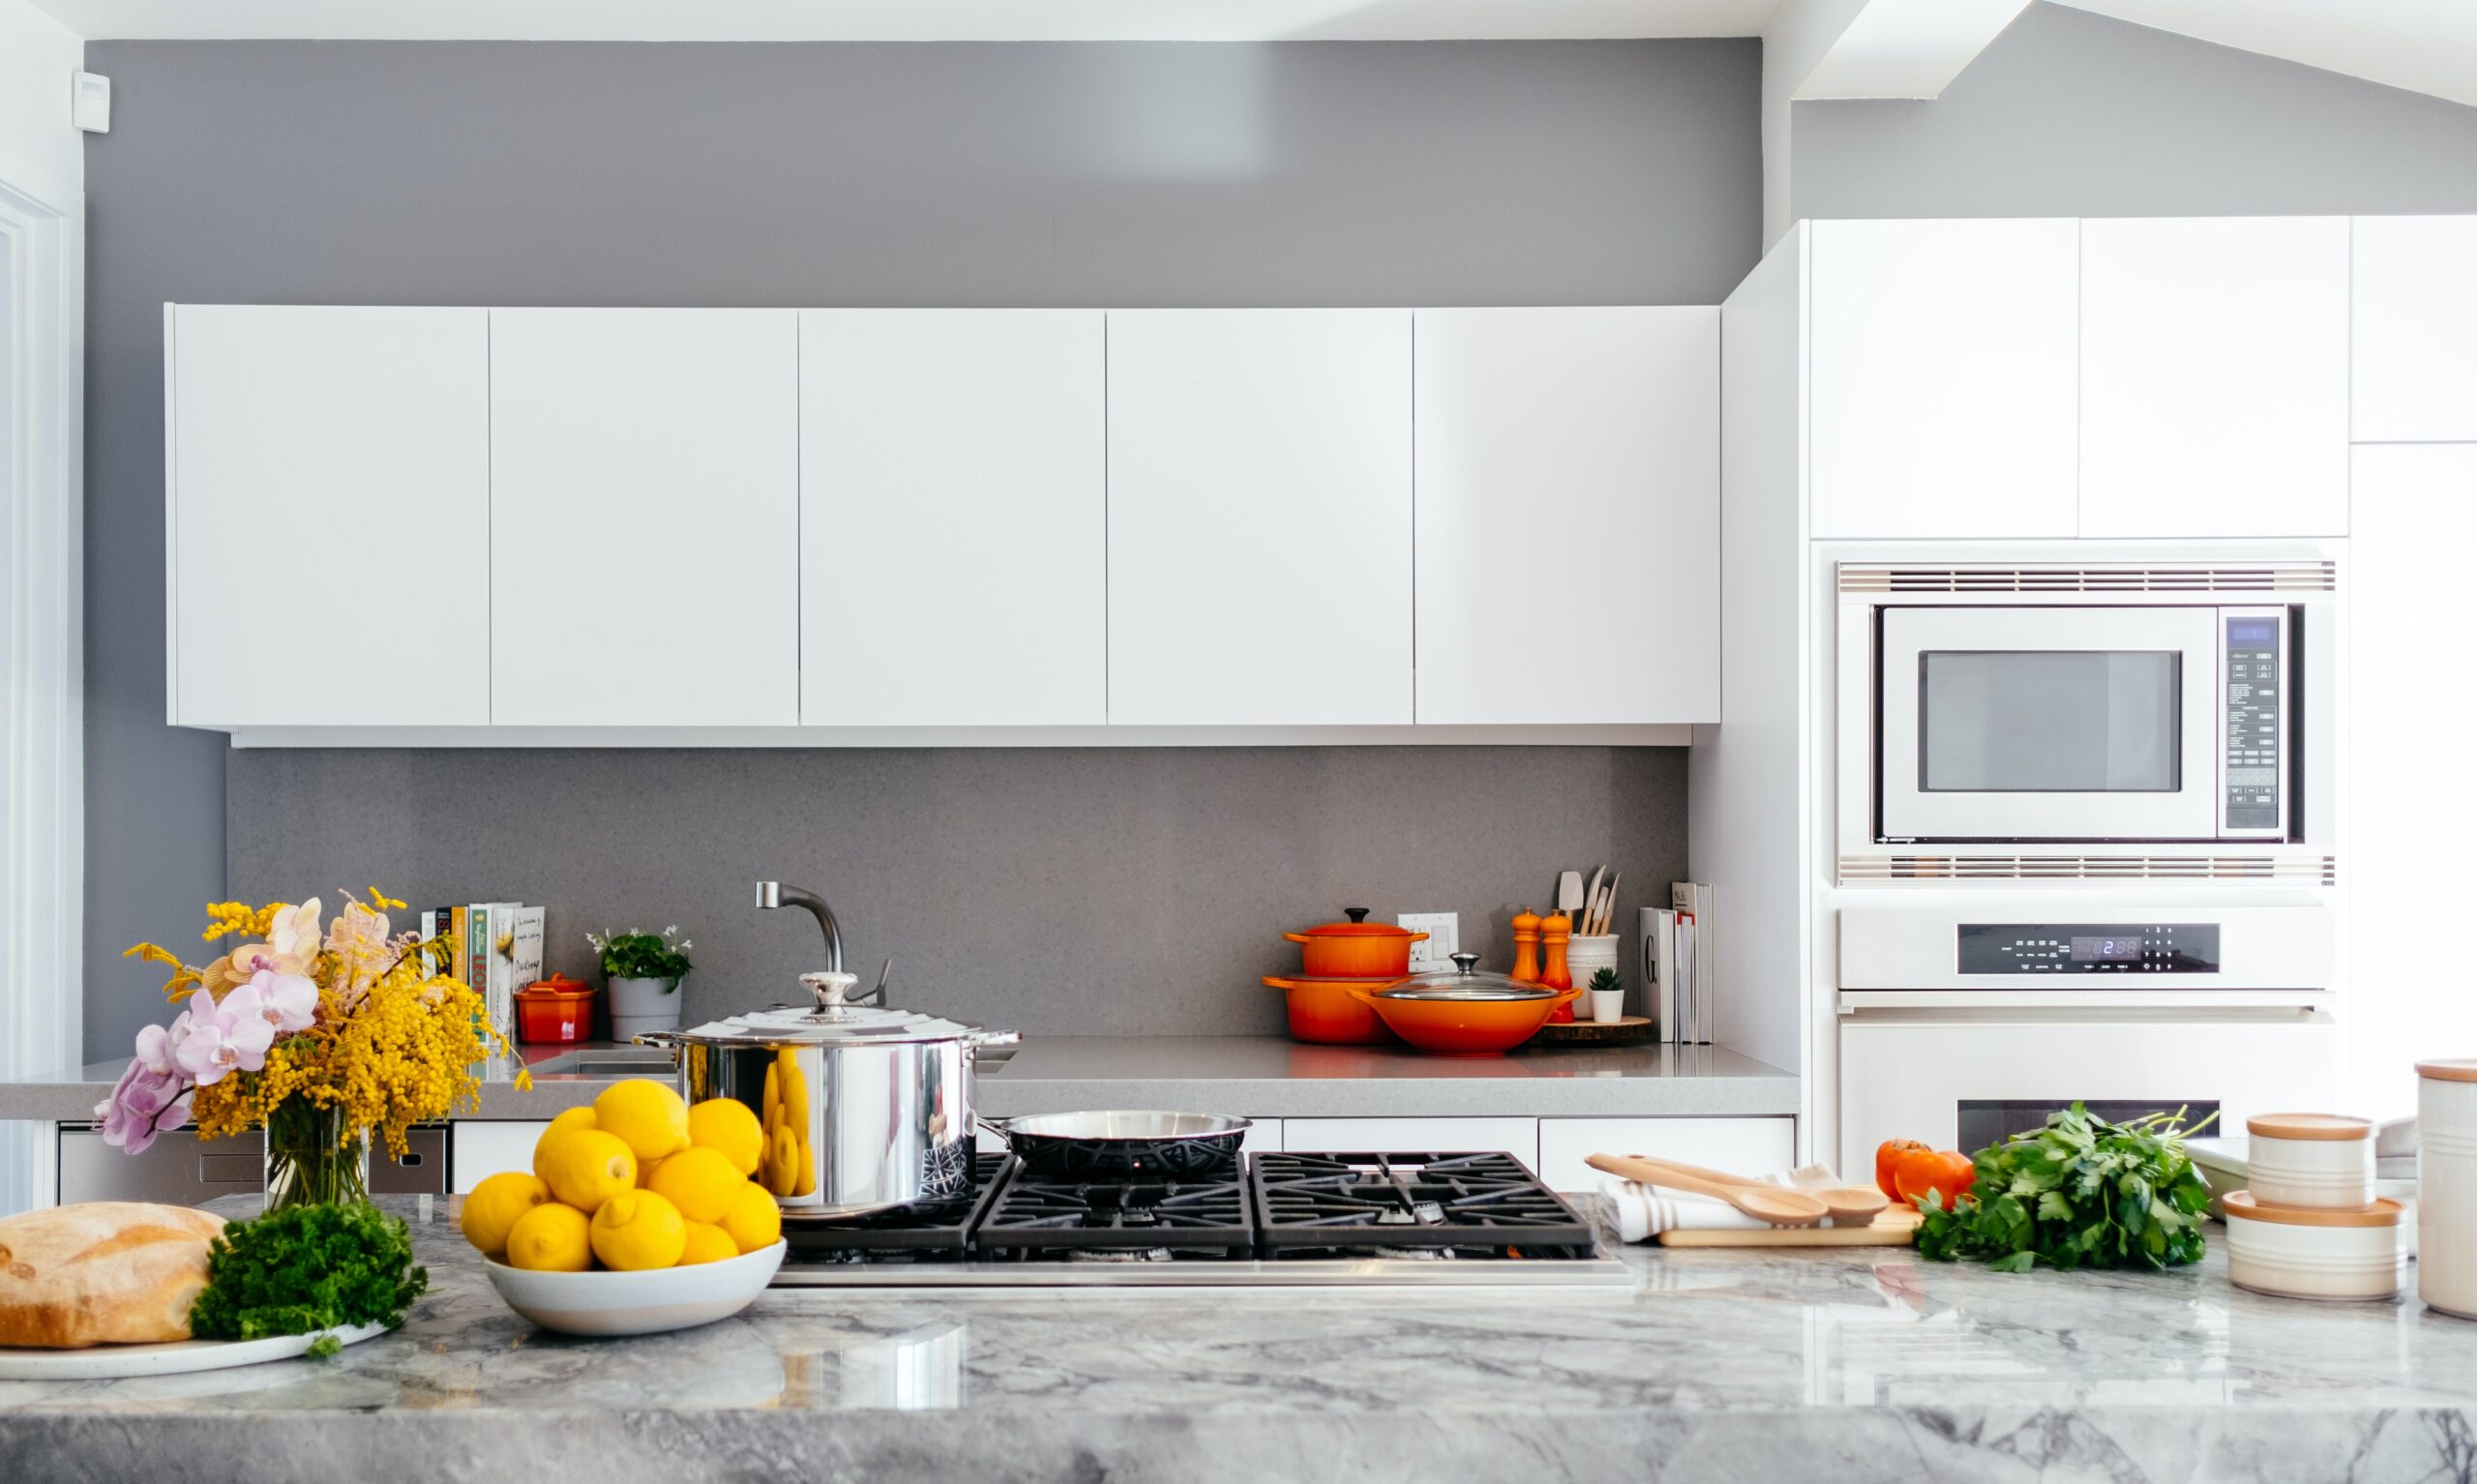 What Color Table Goes Best With White Kitchen Cabinets?